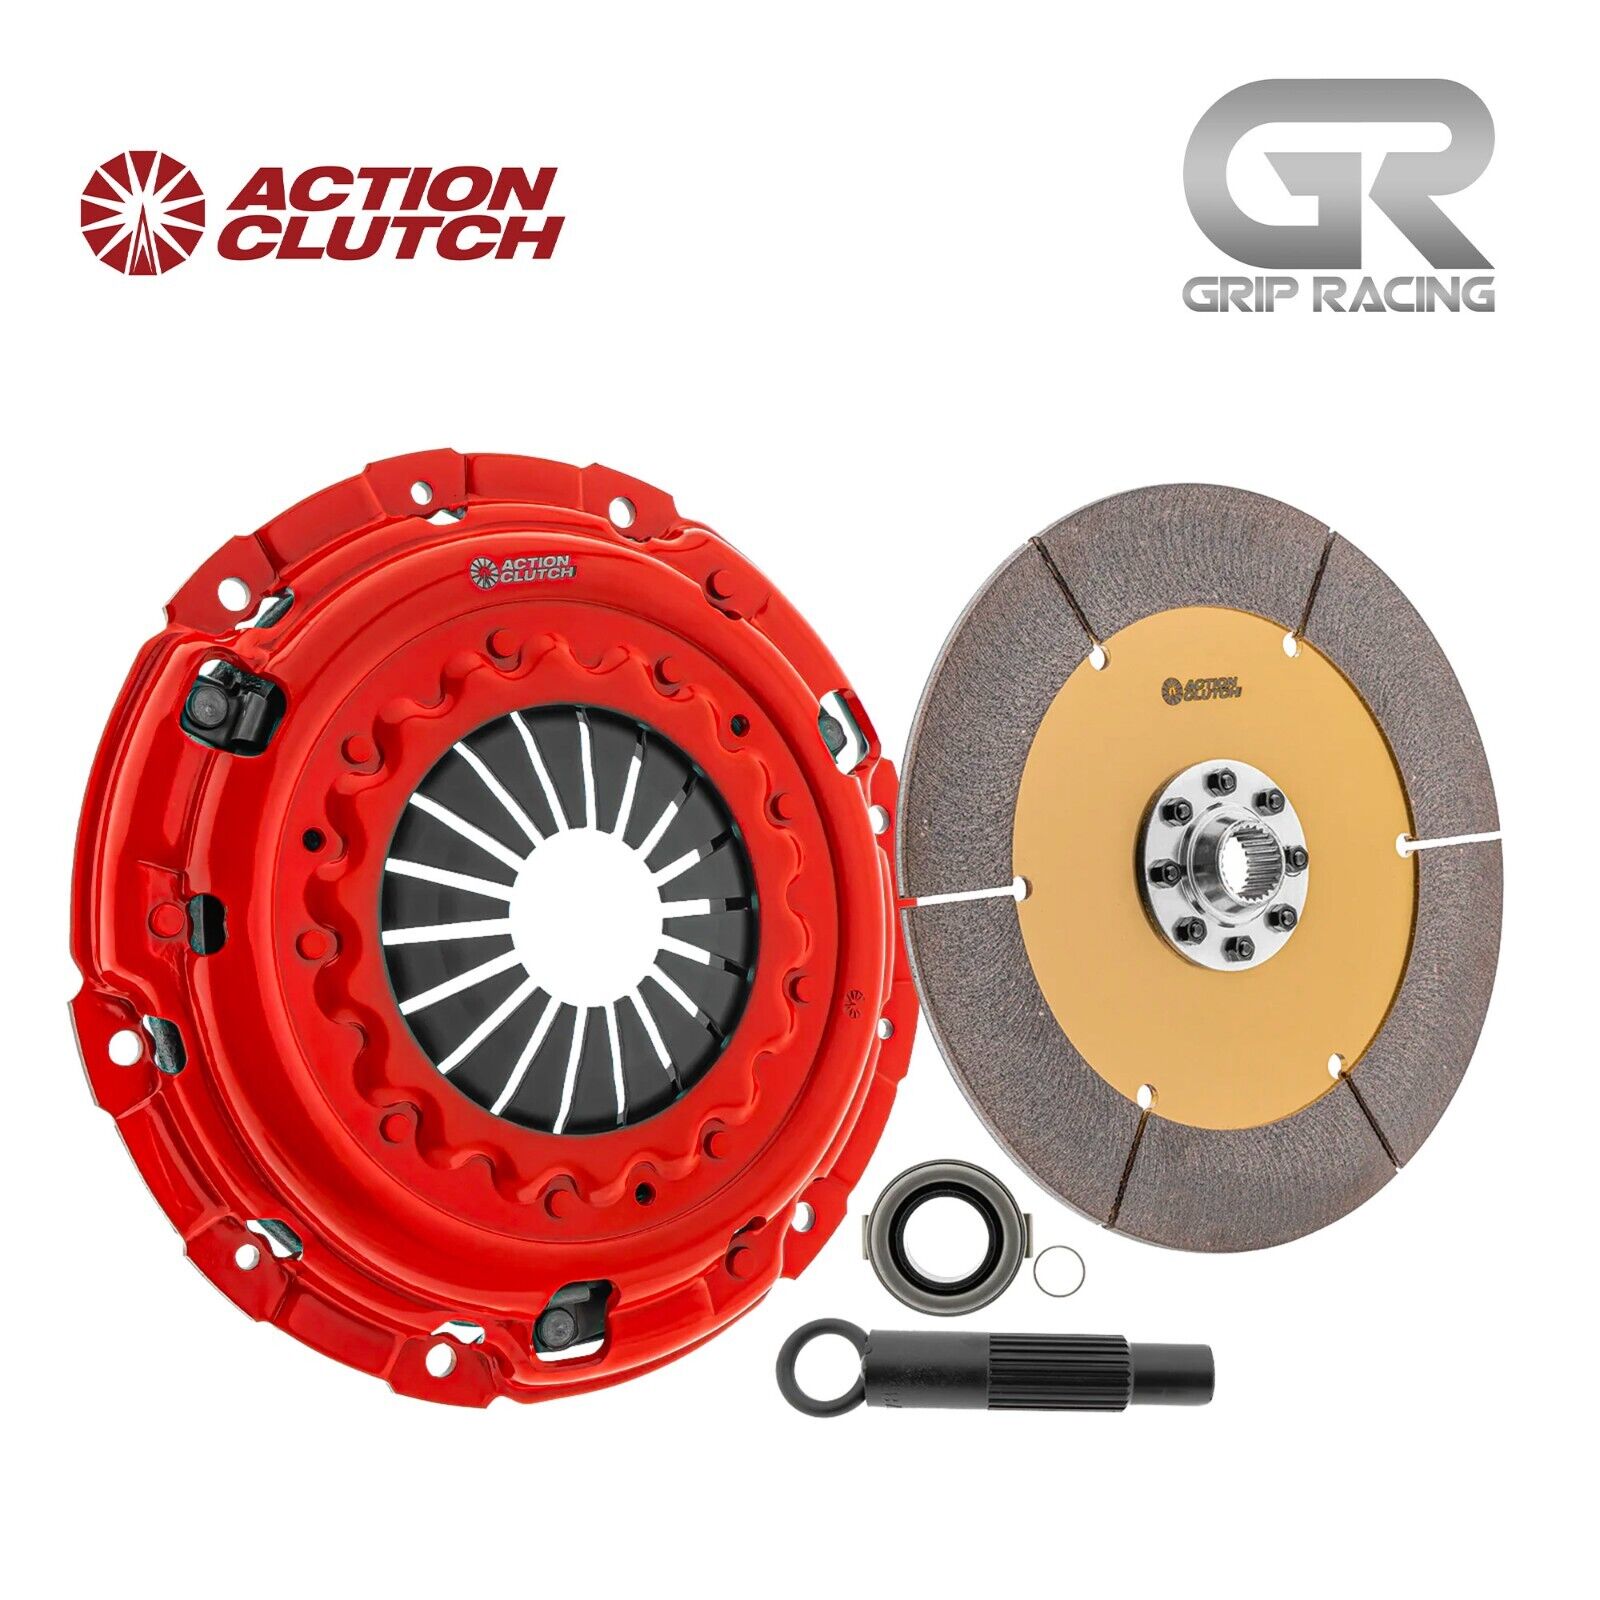 AC Ironman Unsprung Clutch Kit For Mitsubishi Eclipse GST 90-99 2.0(4G63T) Turbo